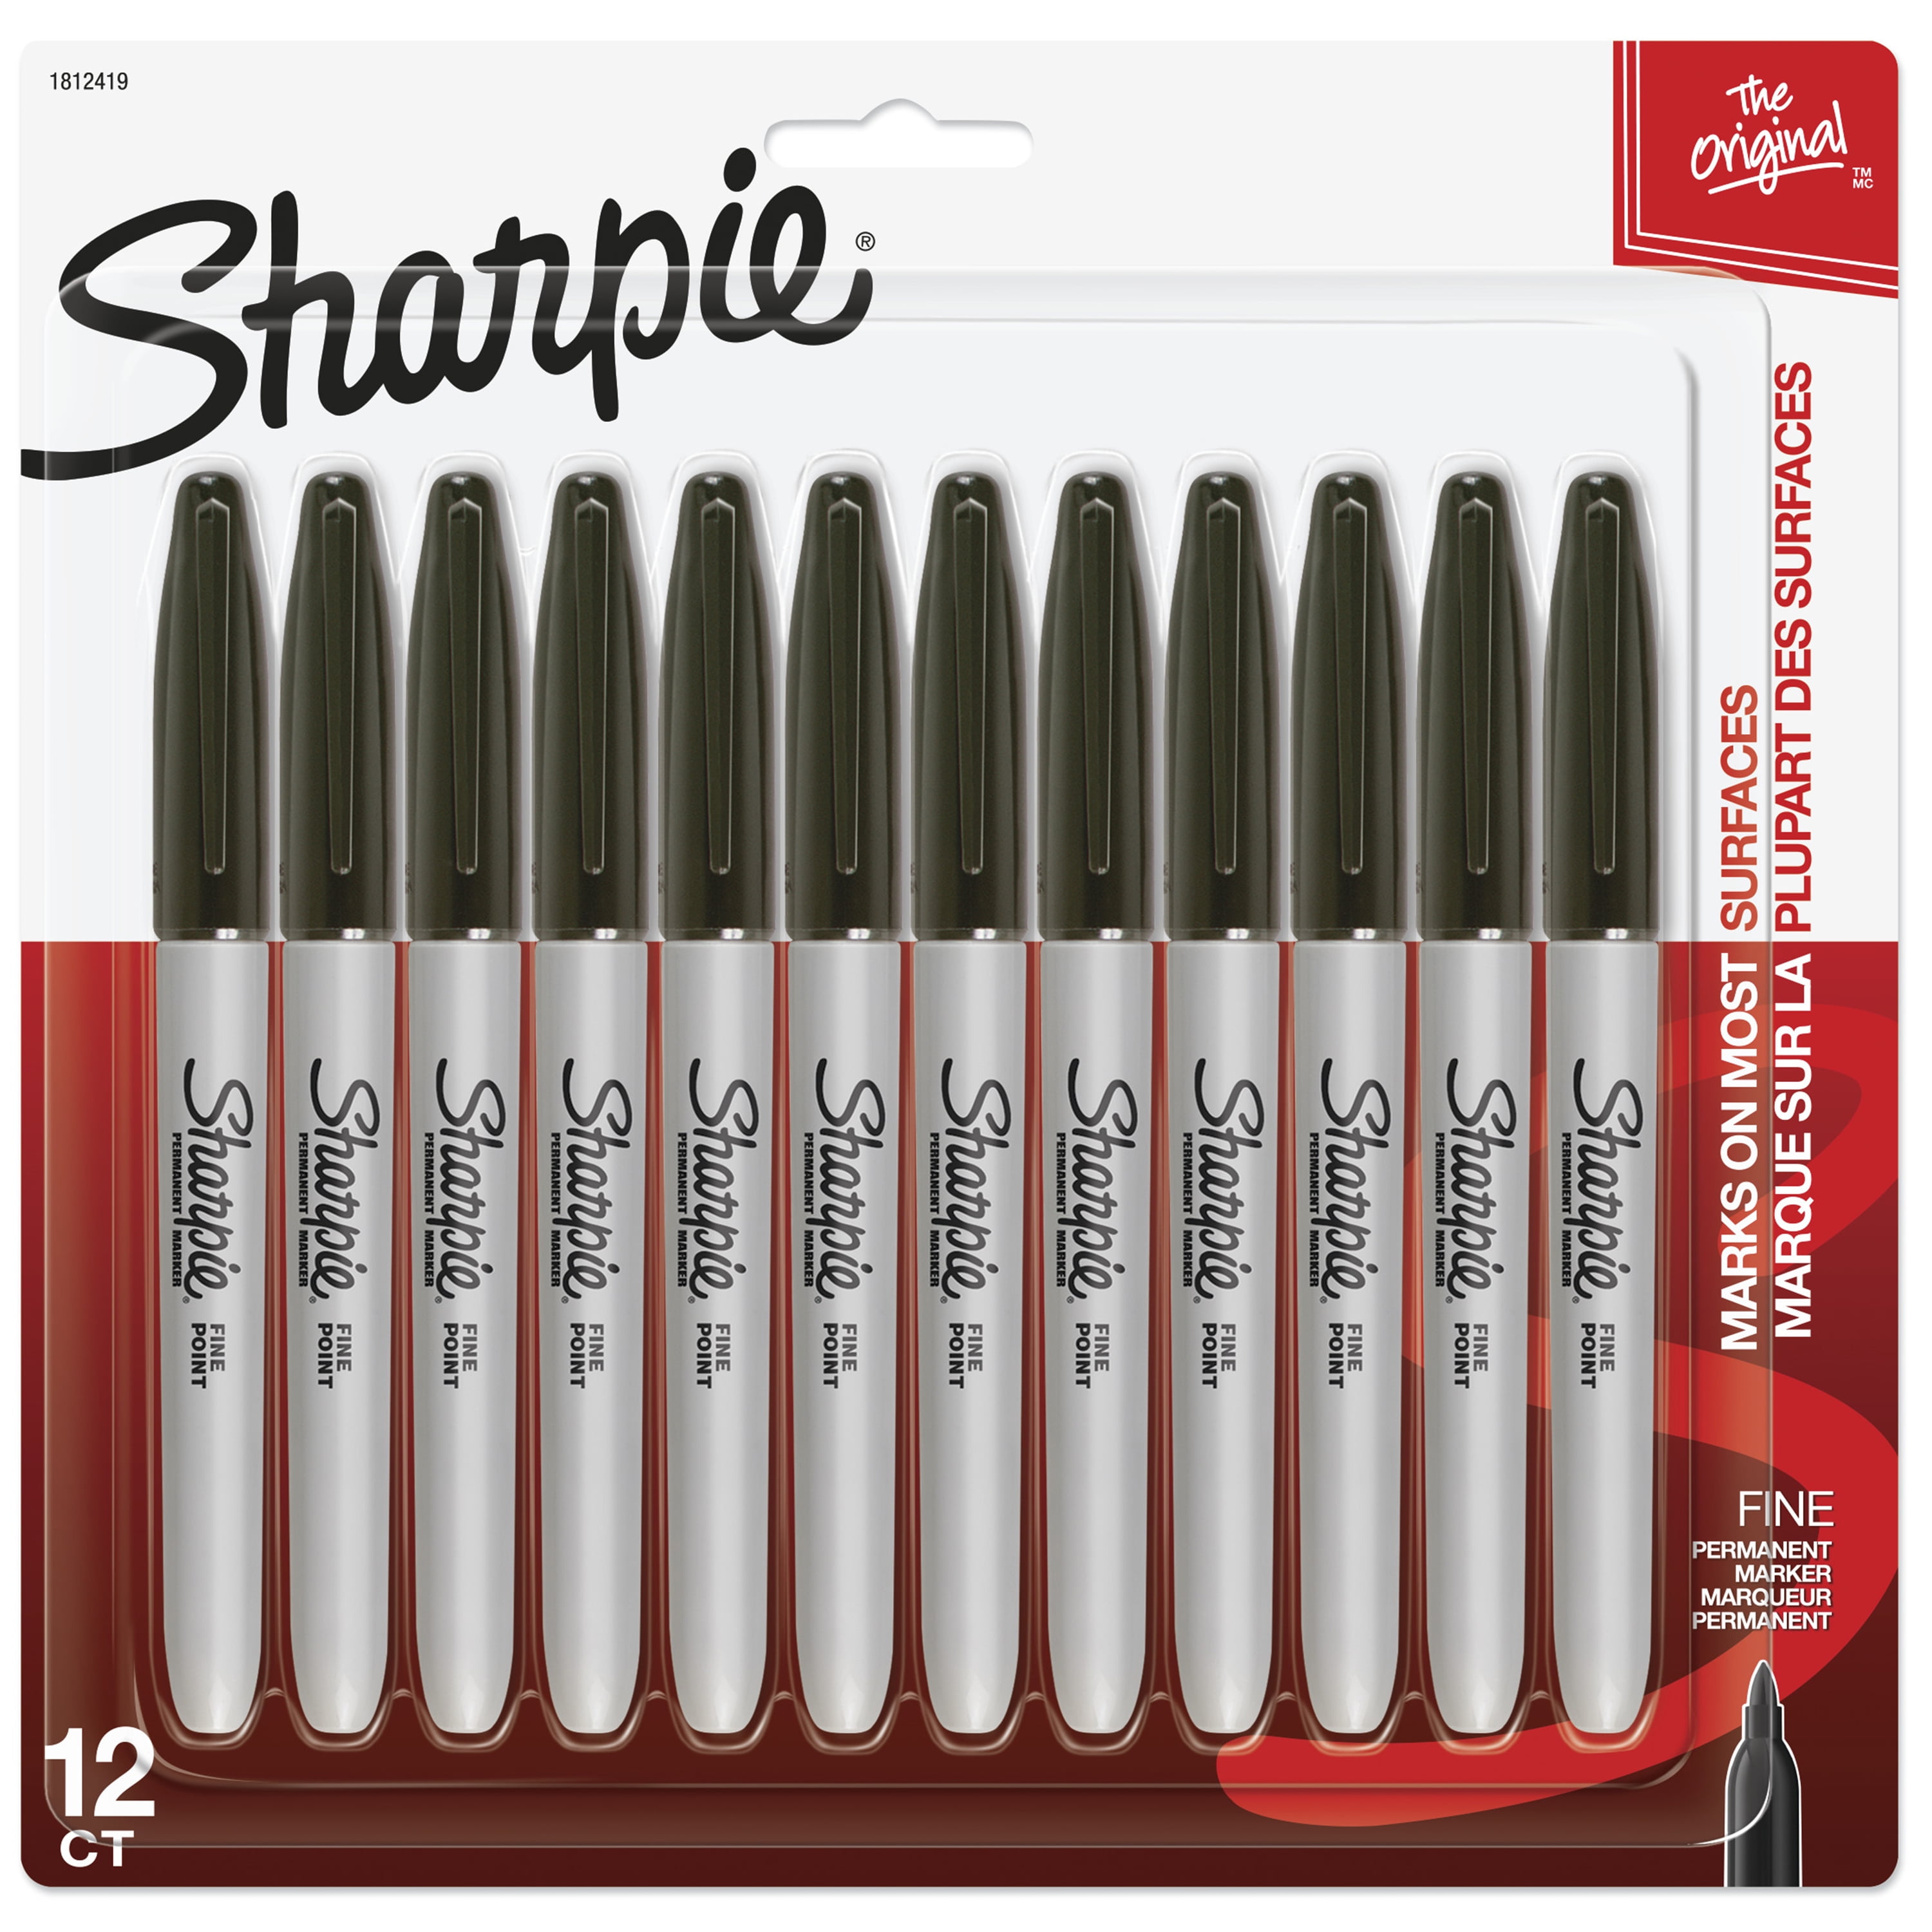 Sharpie Metallic 3 Pack, 3 pk - Smith's Food and Drug